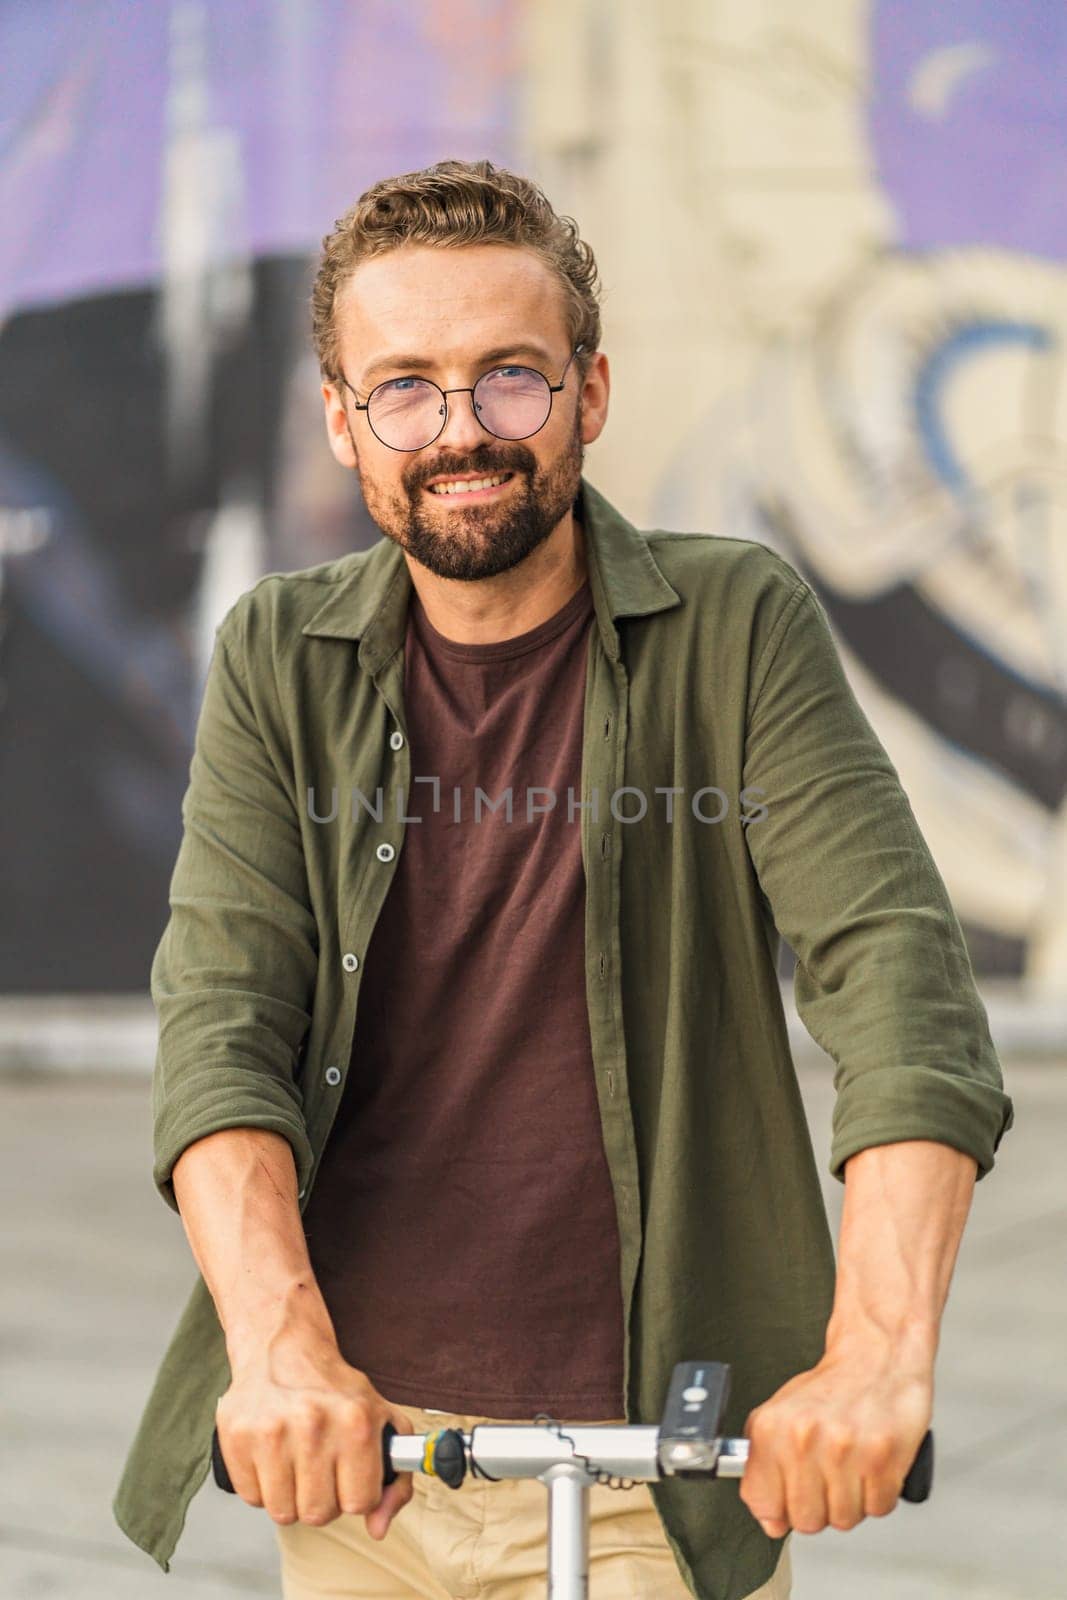 Man photographed outdoors, basking in natural sunlight. With confident and stylish appearance, he exudes relaxed and charismatic vibe. outdoor setting adds touch of authenticity and freshness to image. High quality photo